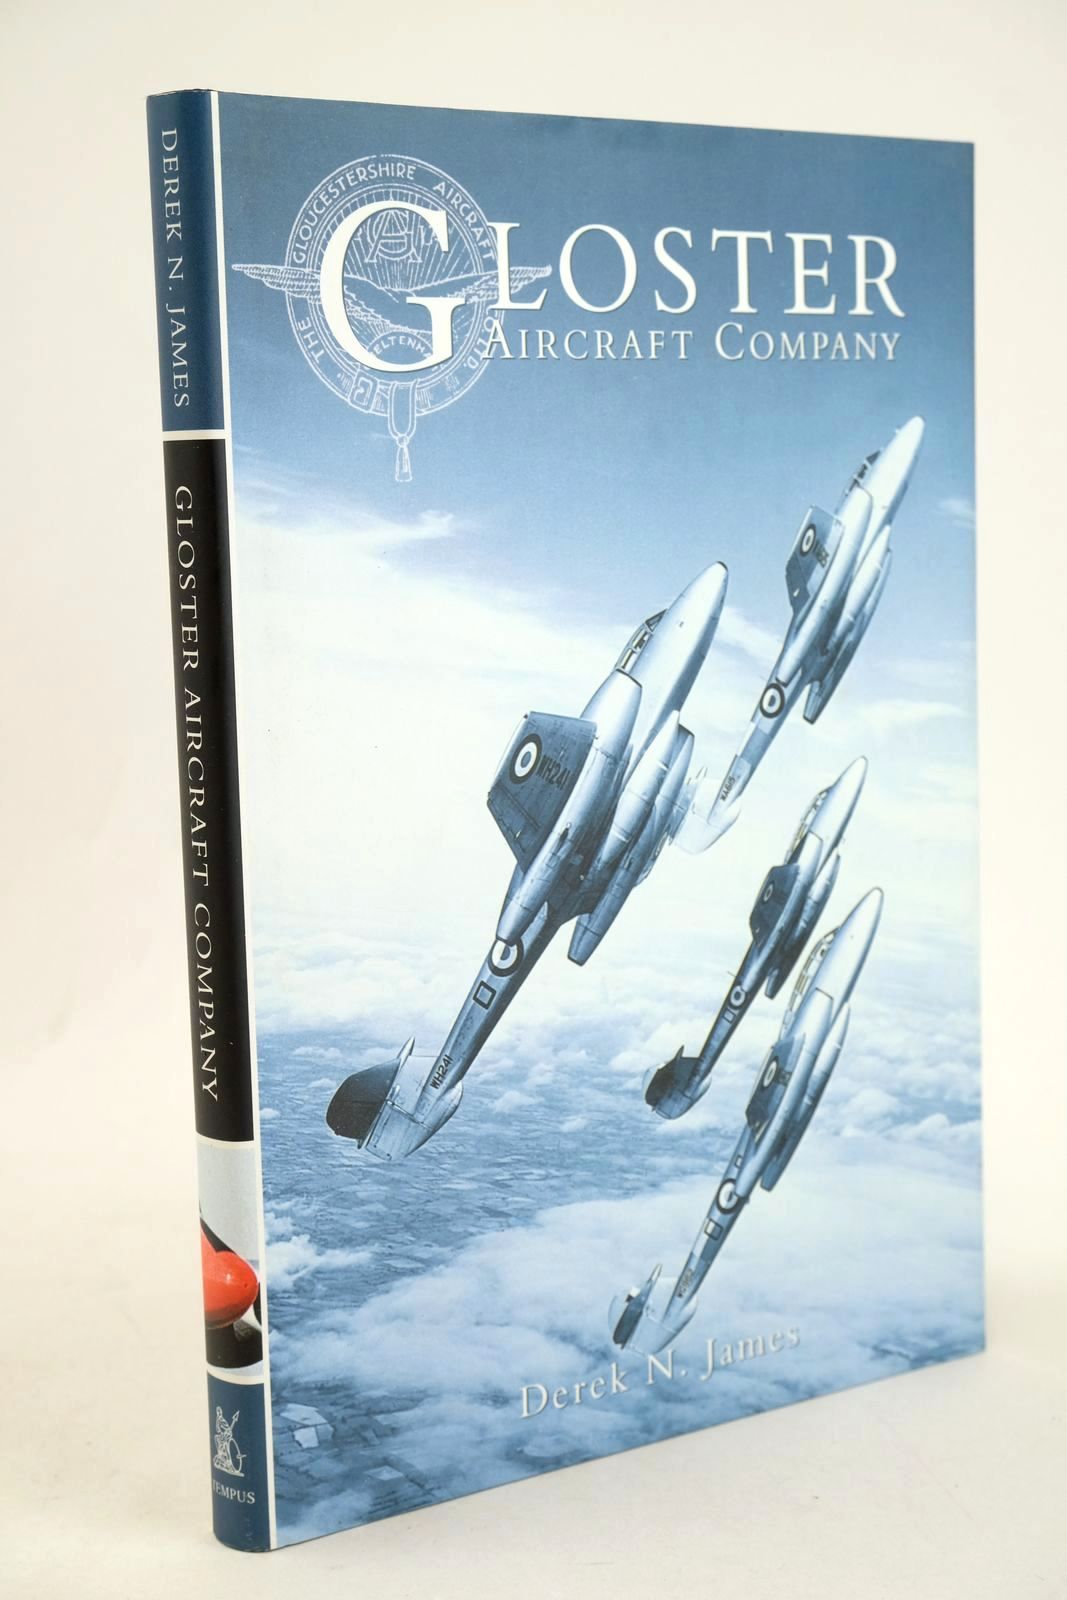 Photo of GLOSTER AIRCRAFT COMPANY written by James, Derek N. published by Tempus (STOCK CODE: 1327900)  for sale by Stella & Rose's Books